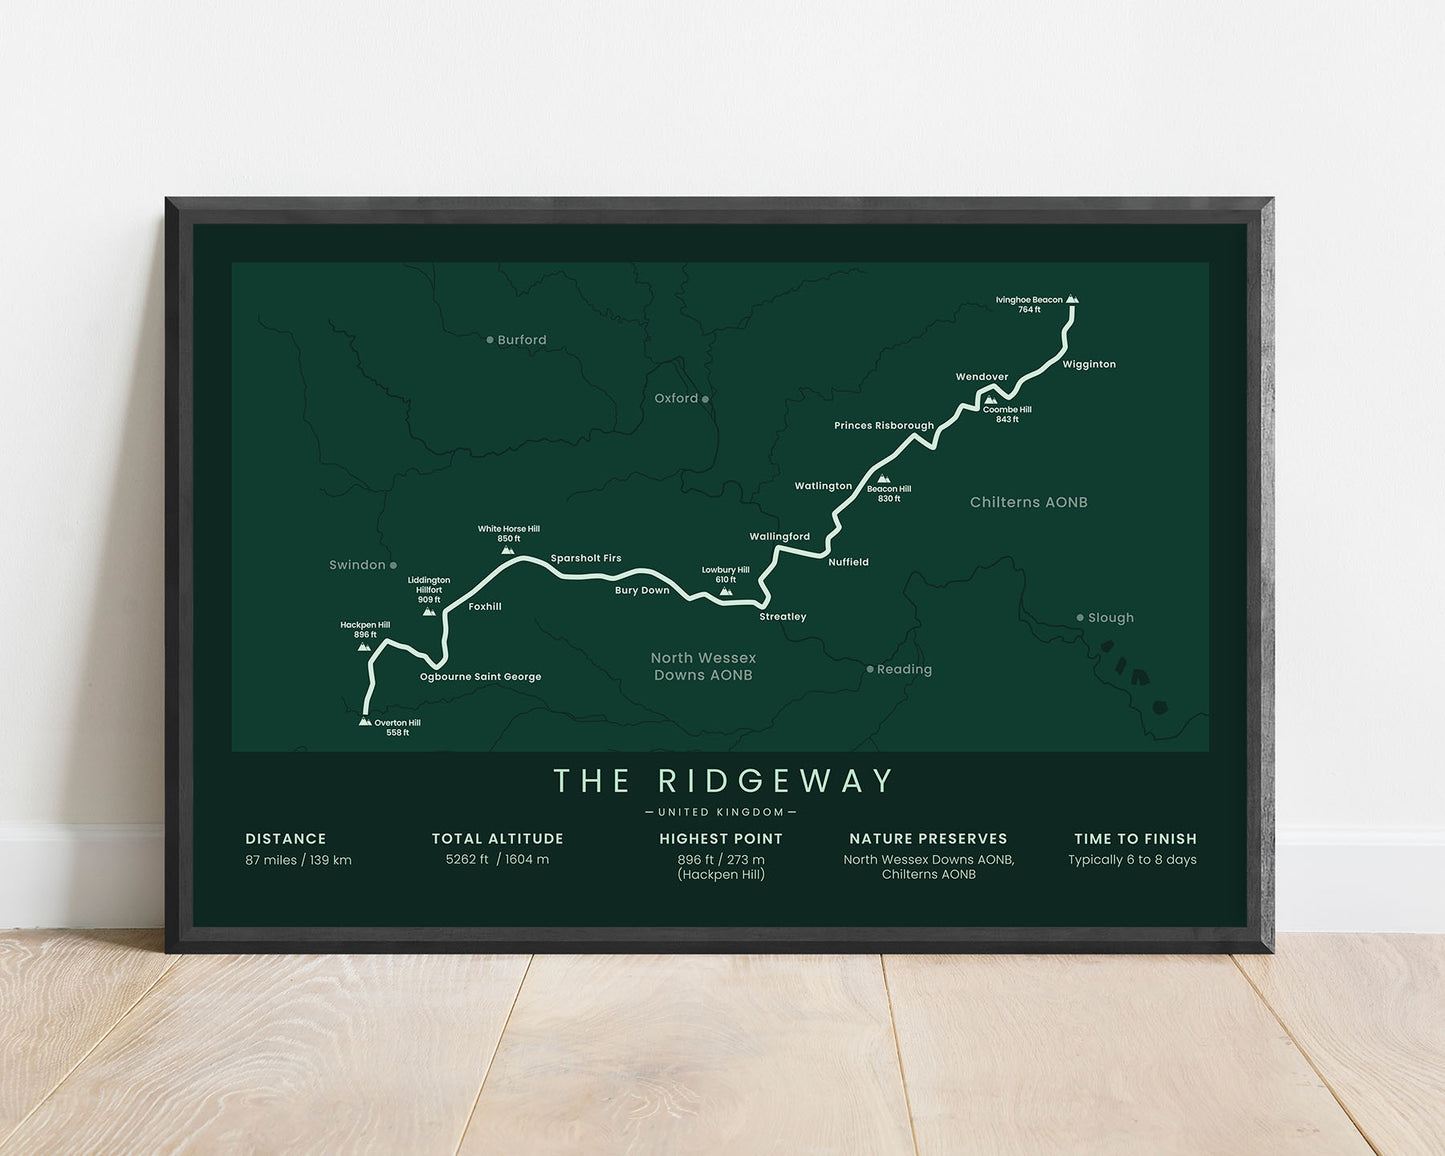 The Ridgeway National Trail (England) Hike Wall Art with green background